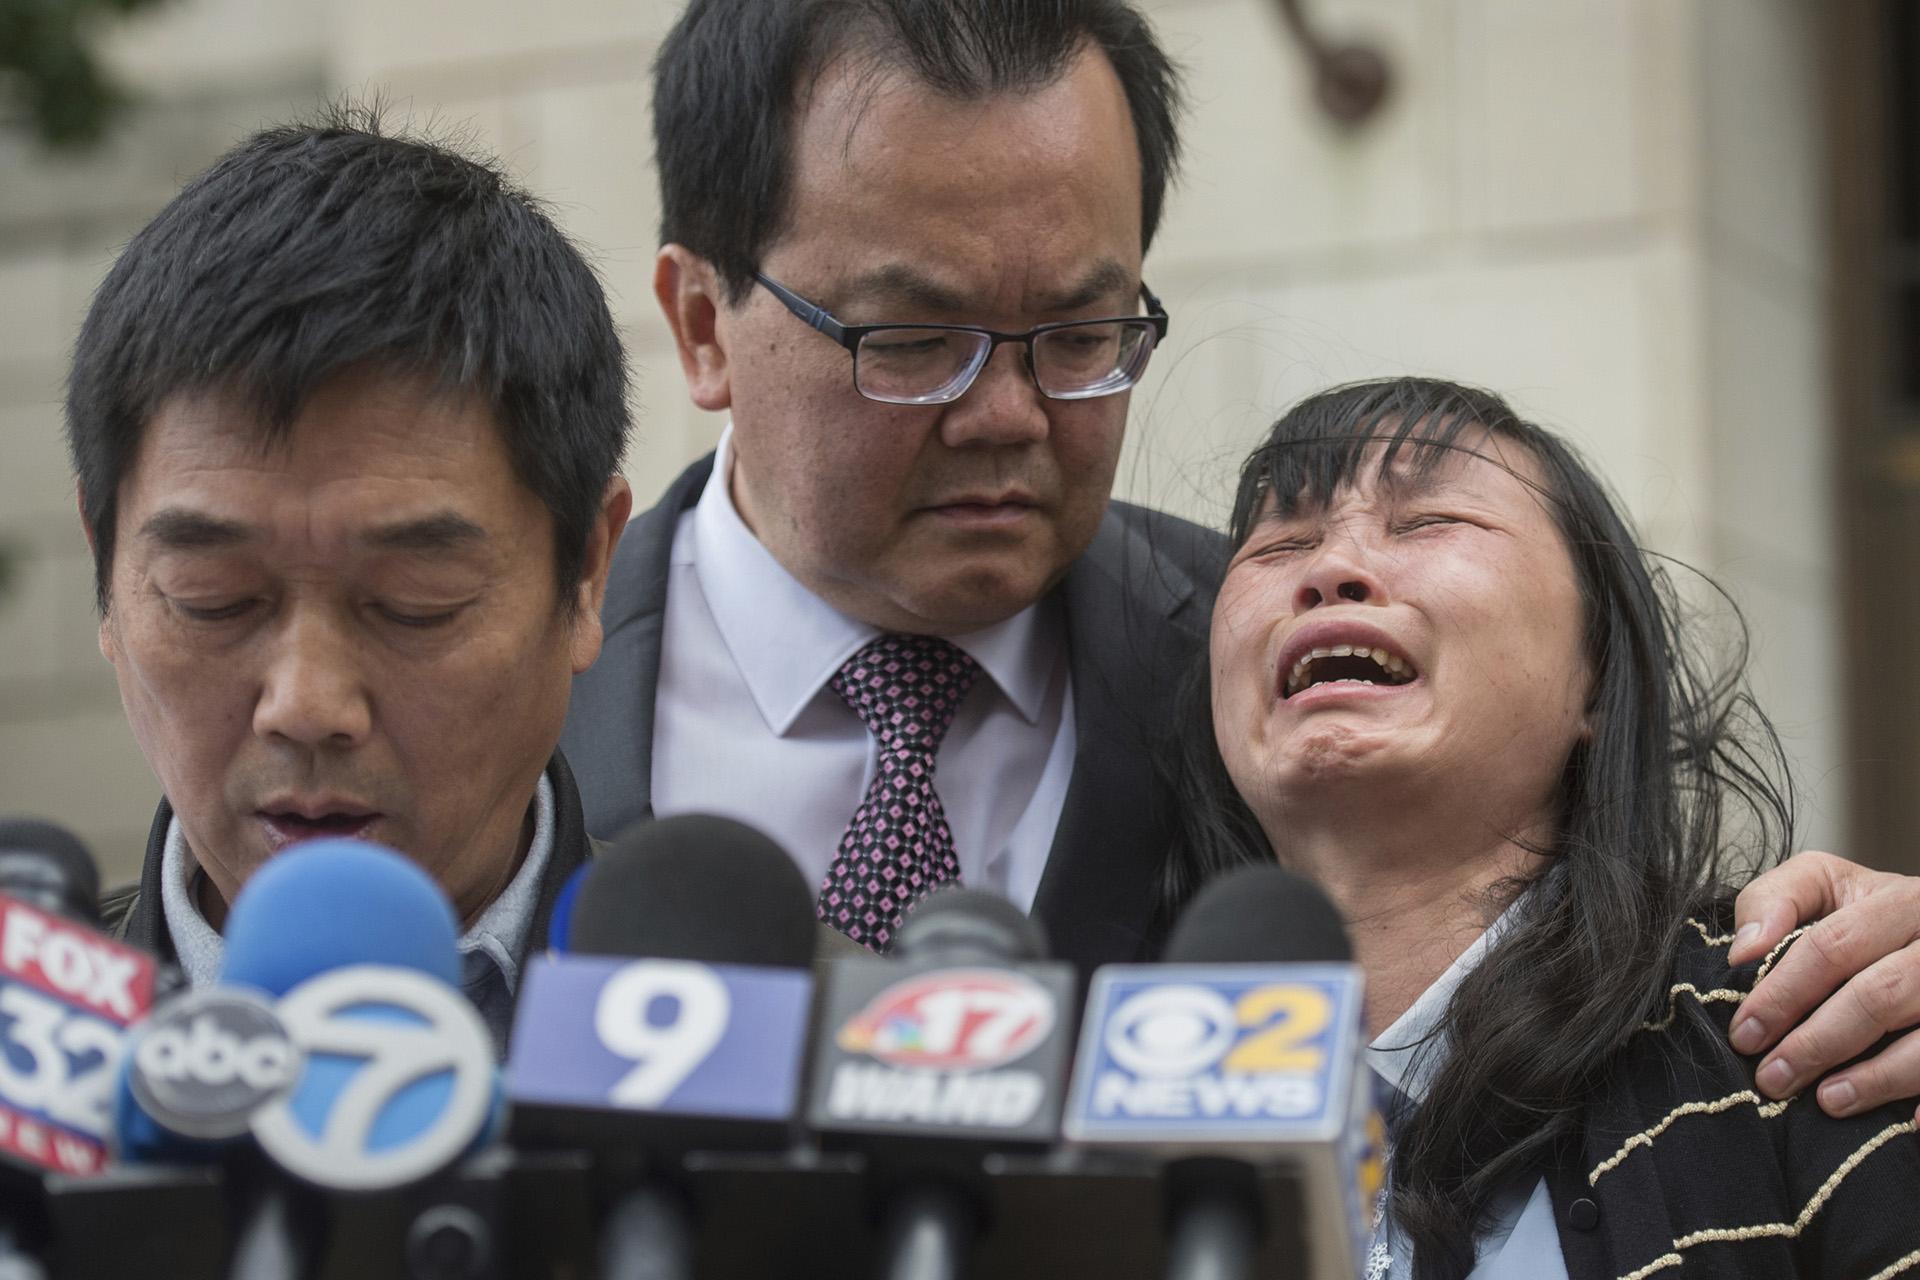  In this Monday, June 24, 2019 file photo, Lifeng Ye, the mother of slain University of Illinois scholar Yingying Zhang, cries out in grief as her husband Ronggao Zhang, left, addresses the media after a jury found Brendt Christensen guilty of Yingying Zhang’s murder, at the U.S. Federal Courthouse in Peoria, Illinois. Consoling her is family friend Dr. Kim Tee, center. (Matt Dayhoff / Journal Star via AP, File)